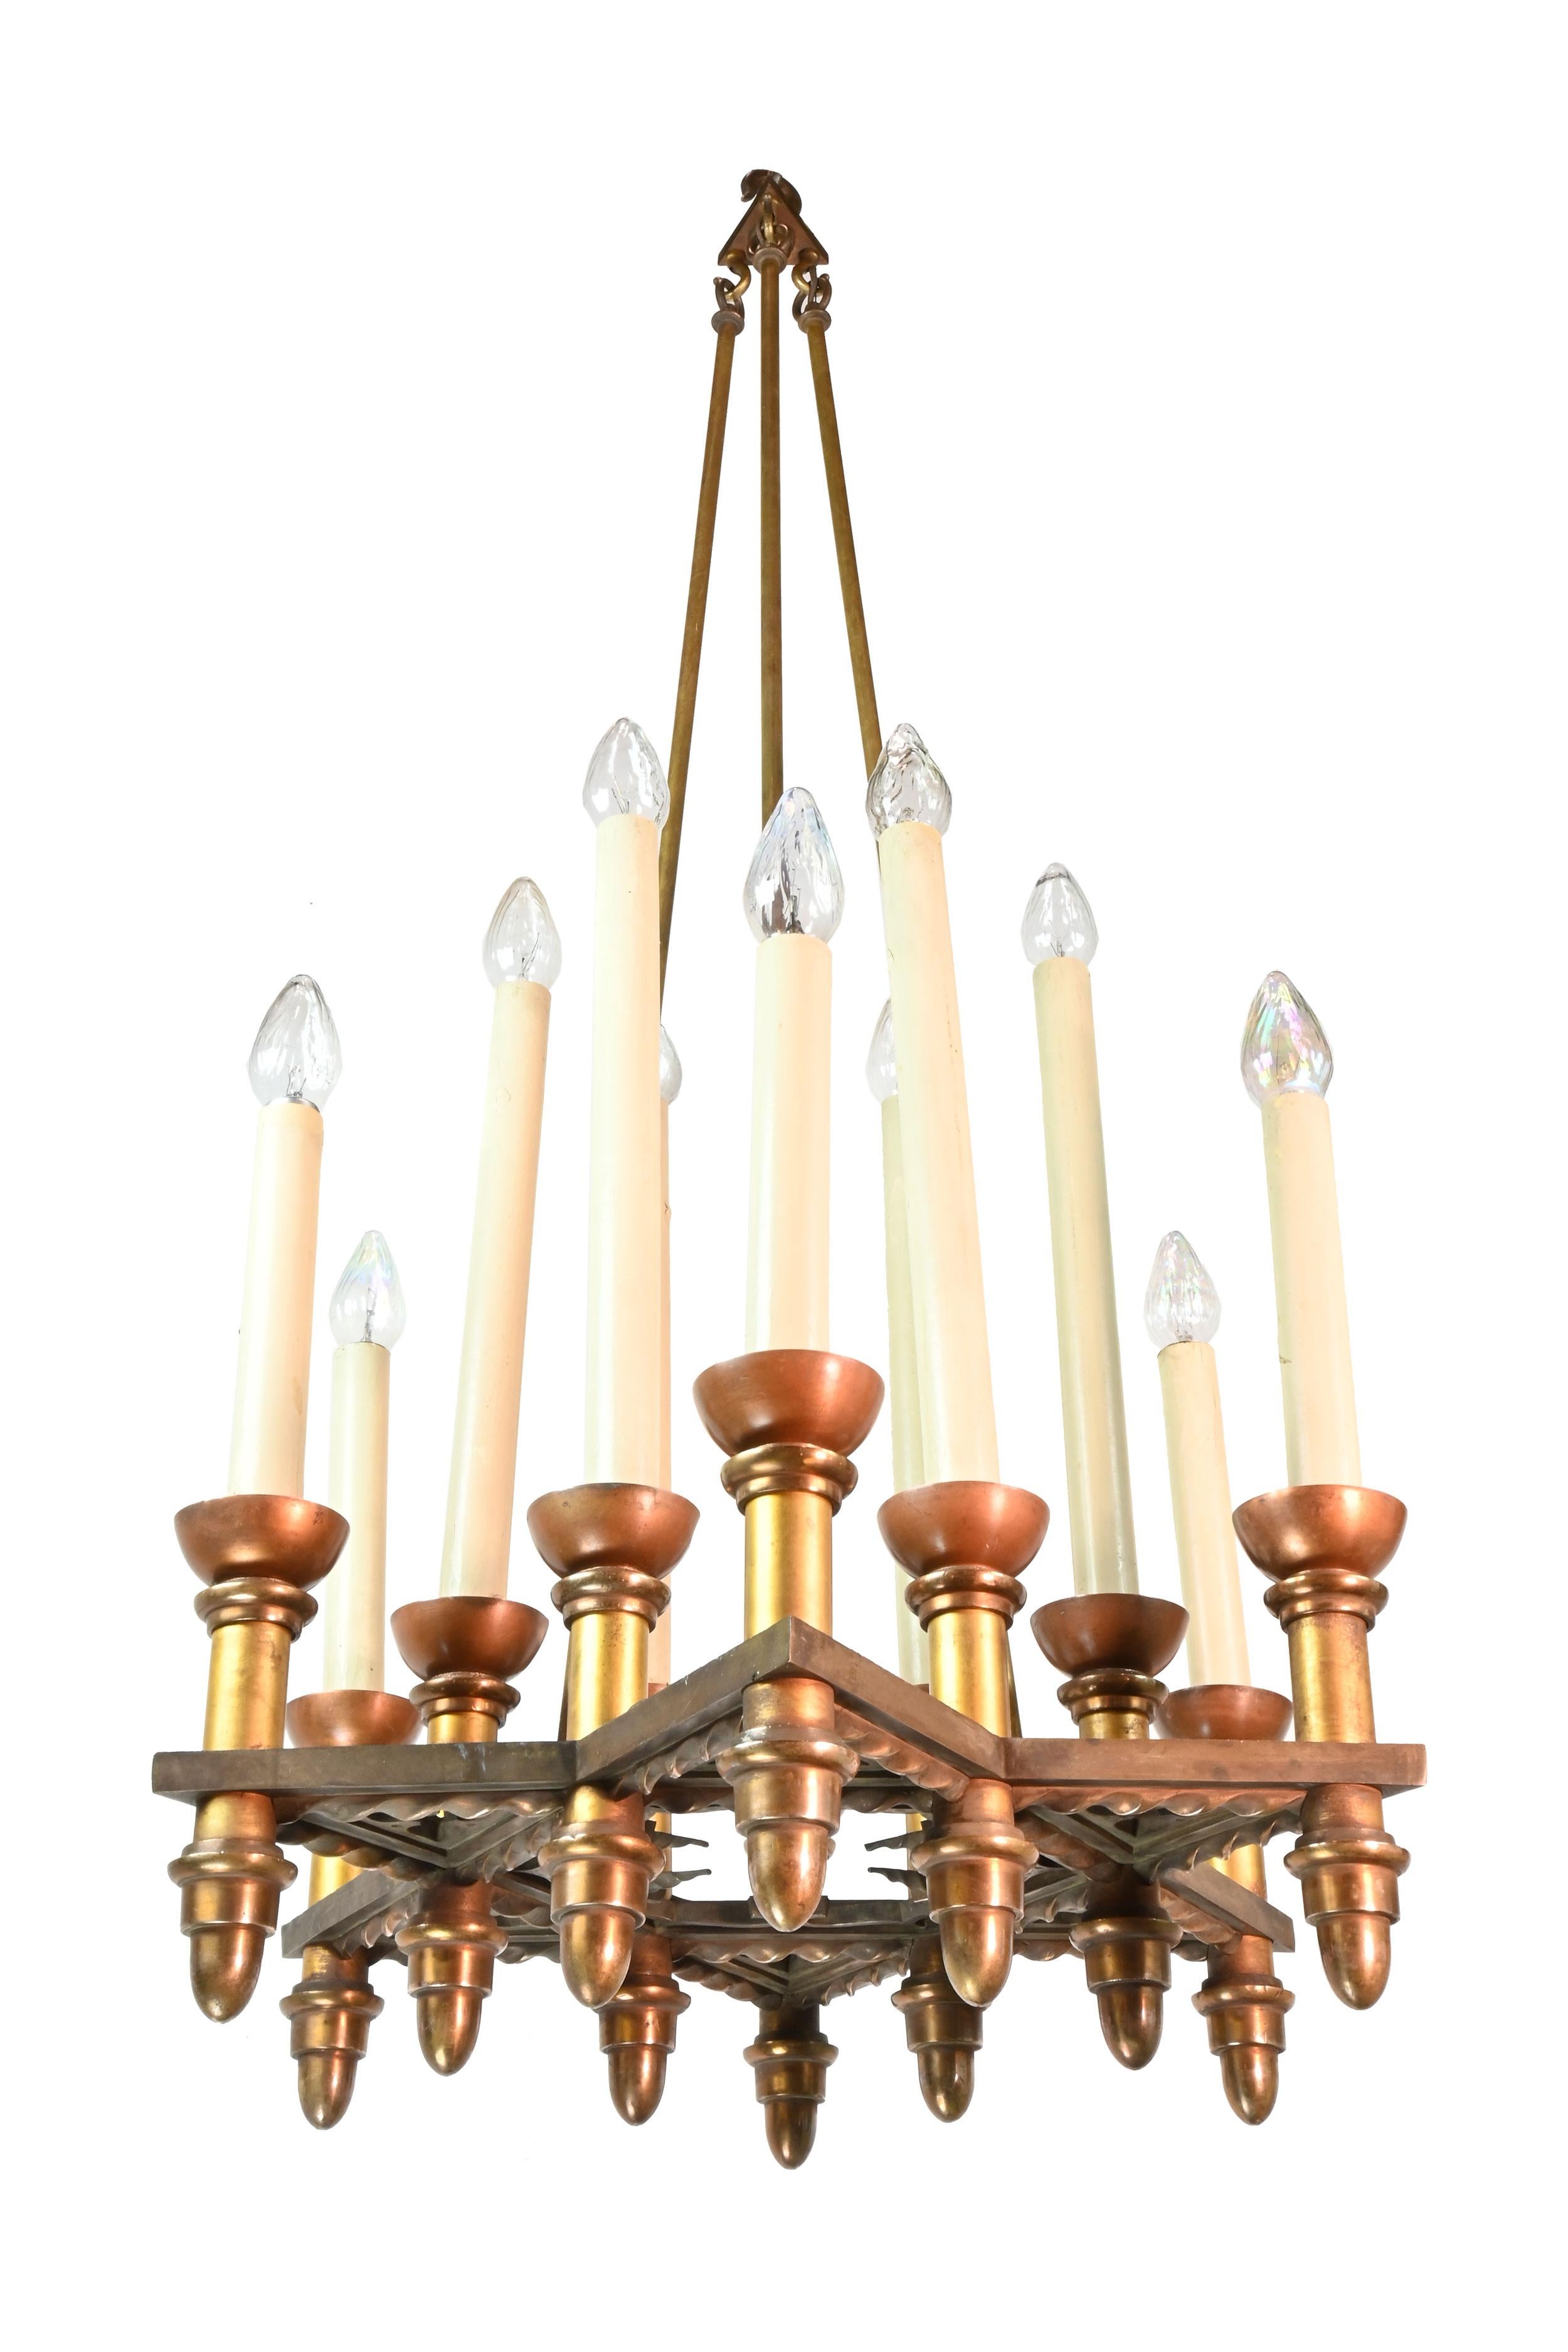 This unique chandelier from the early 20th century incorporates traditional Gothic ornamentation in a pattern of points with lancet shaped trefoils incorporated into the frame of a Star of David. The base of the frame features spiraling, rope like